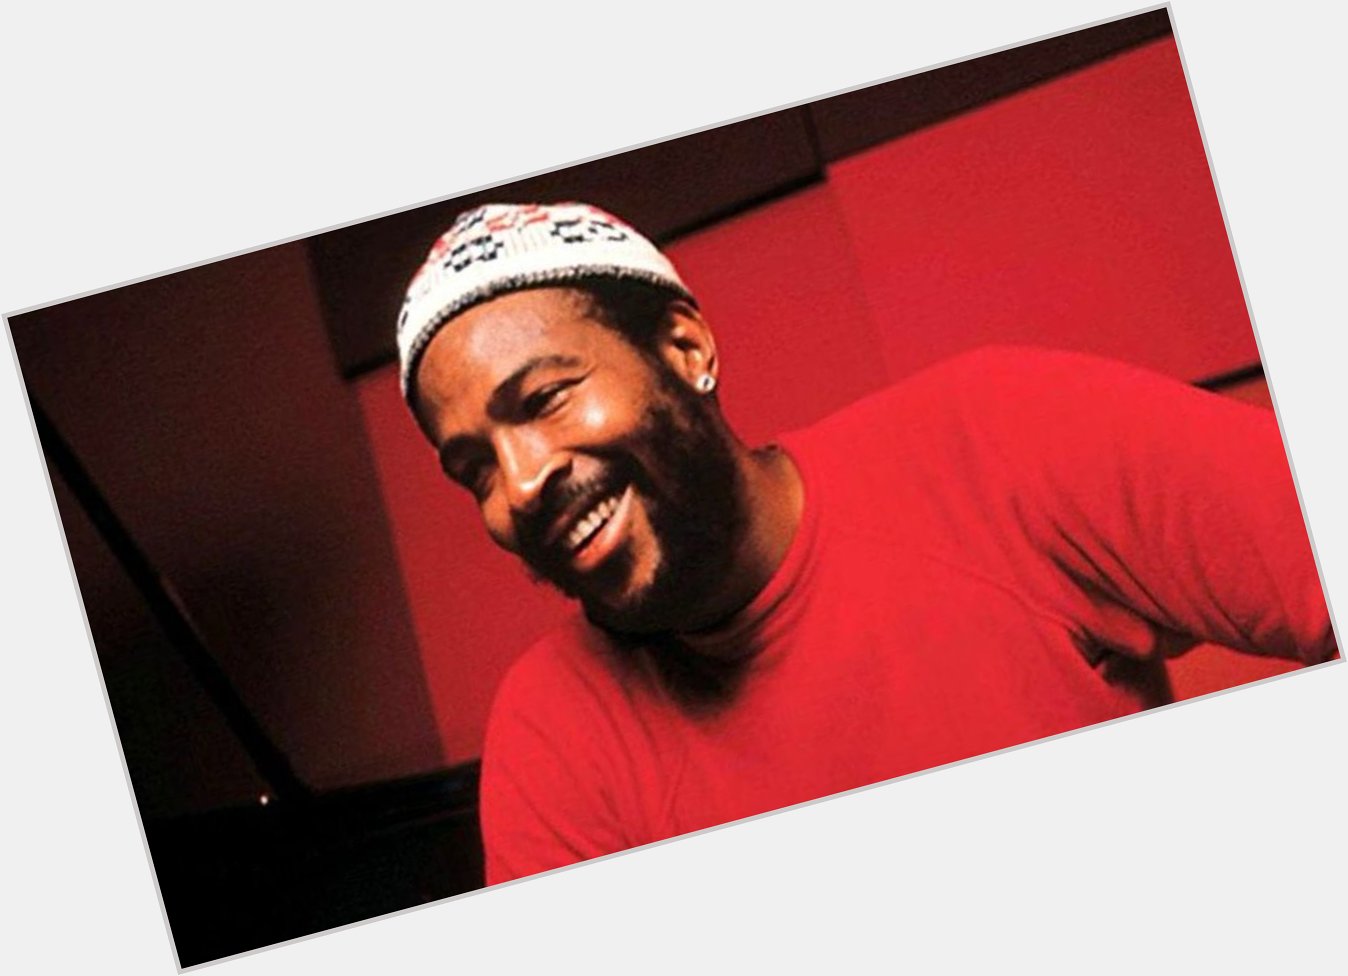 Yesterday it was Rest In Peace Marvin Gaye. Today it s Happy Birthday. 